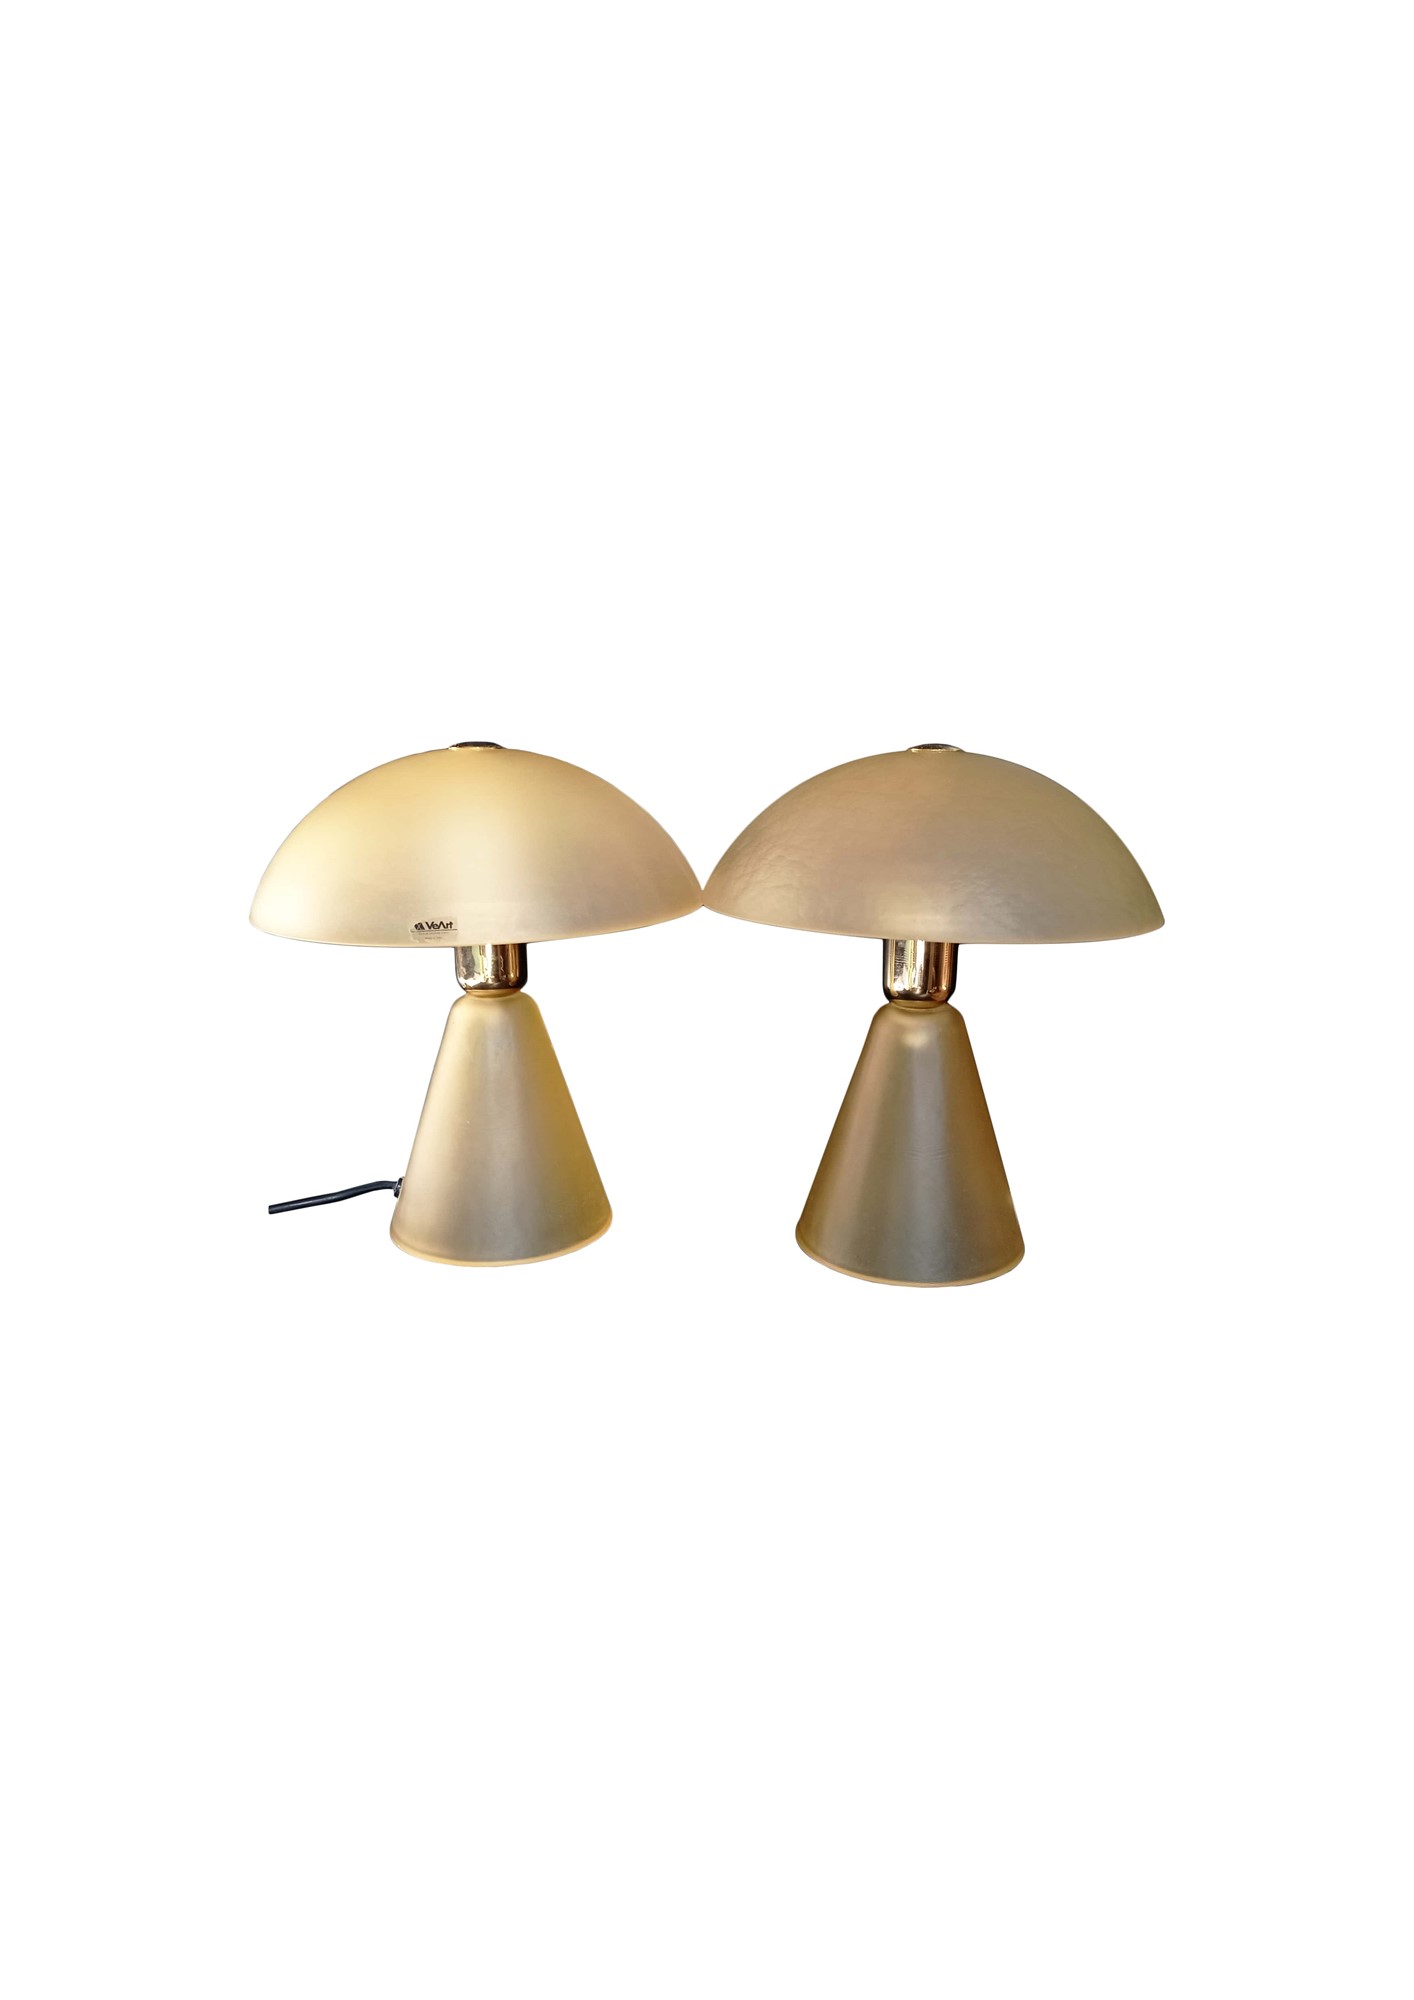 Set of two table lamps - Image 3 of 5